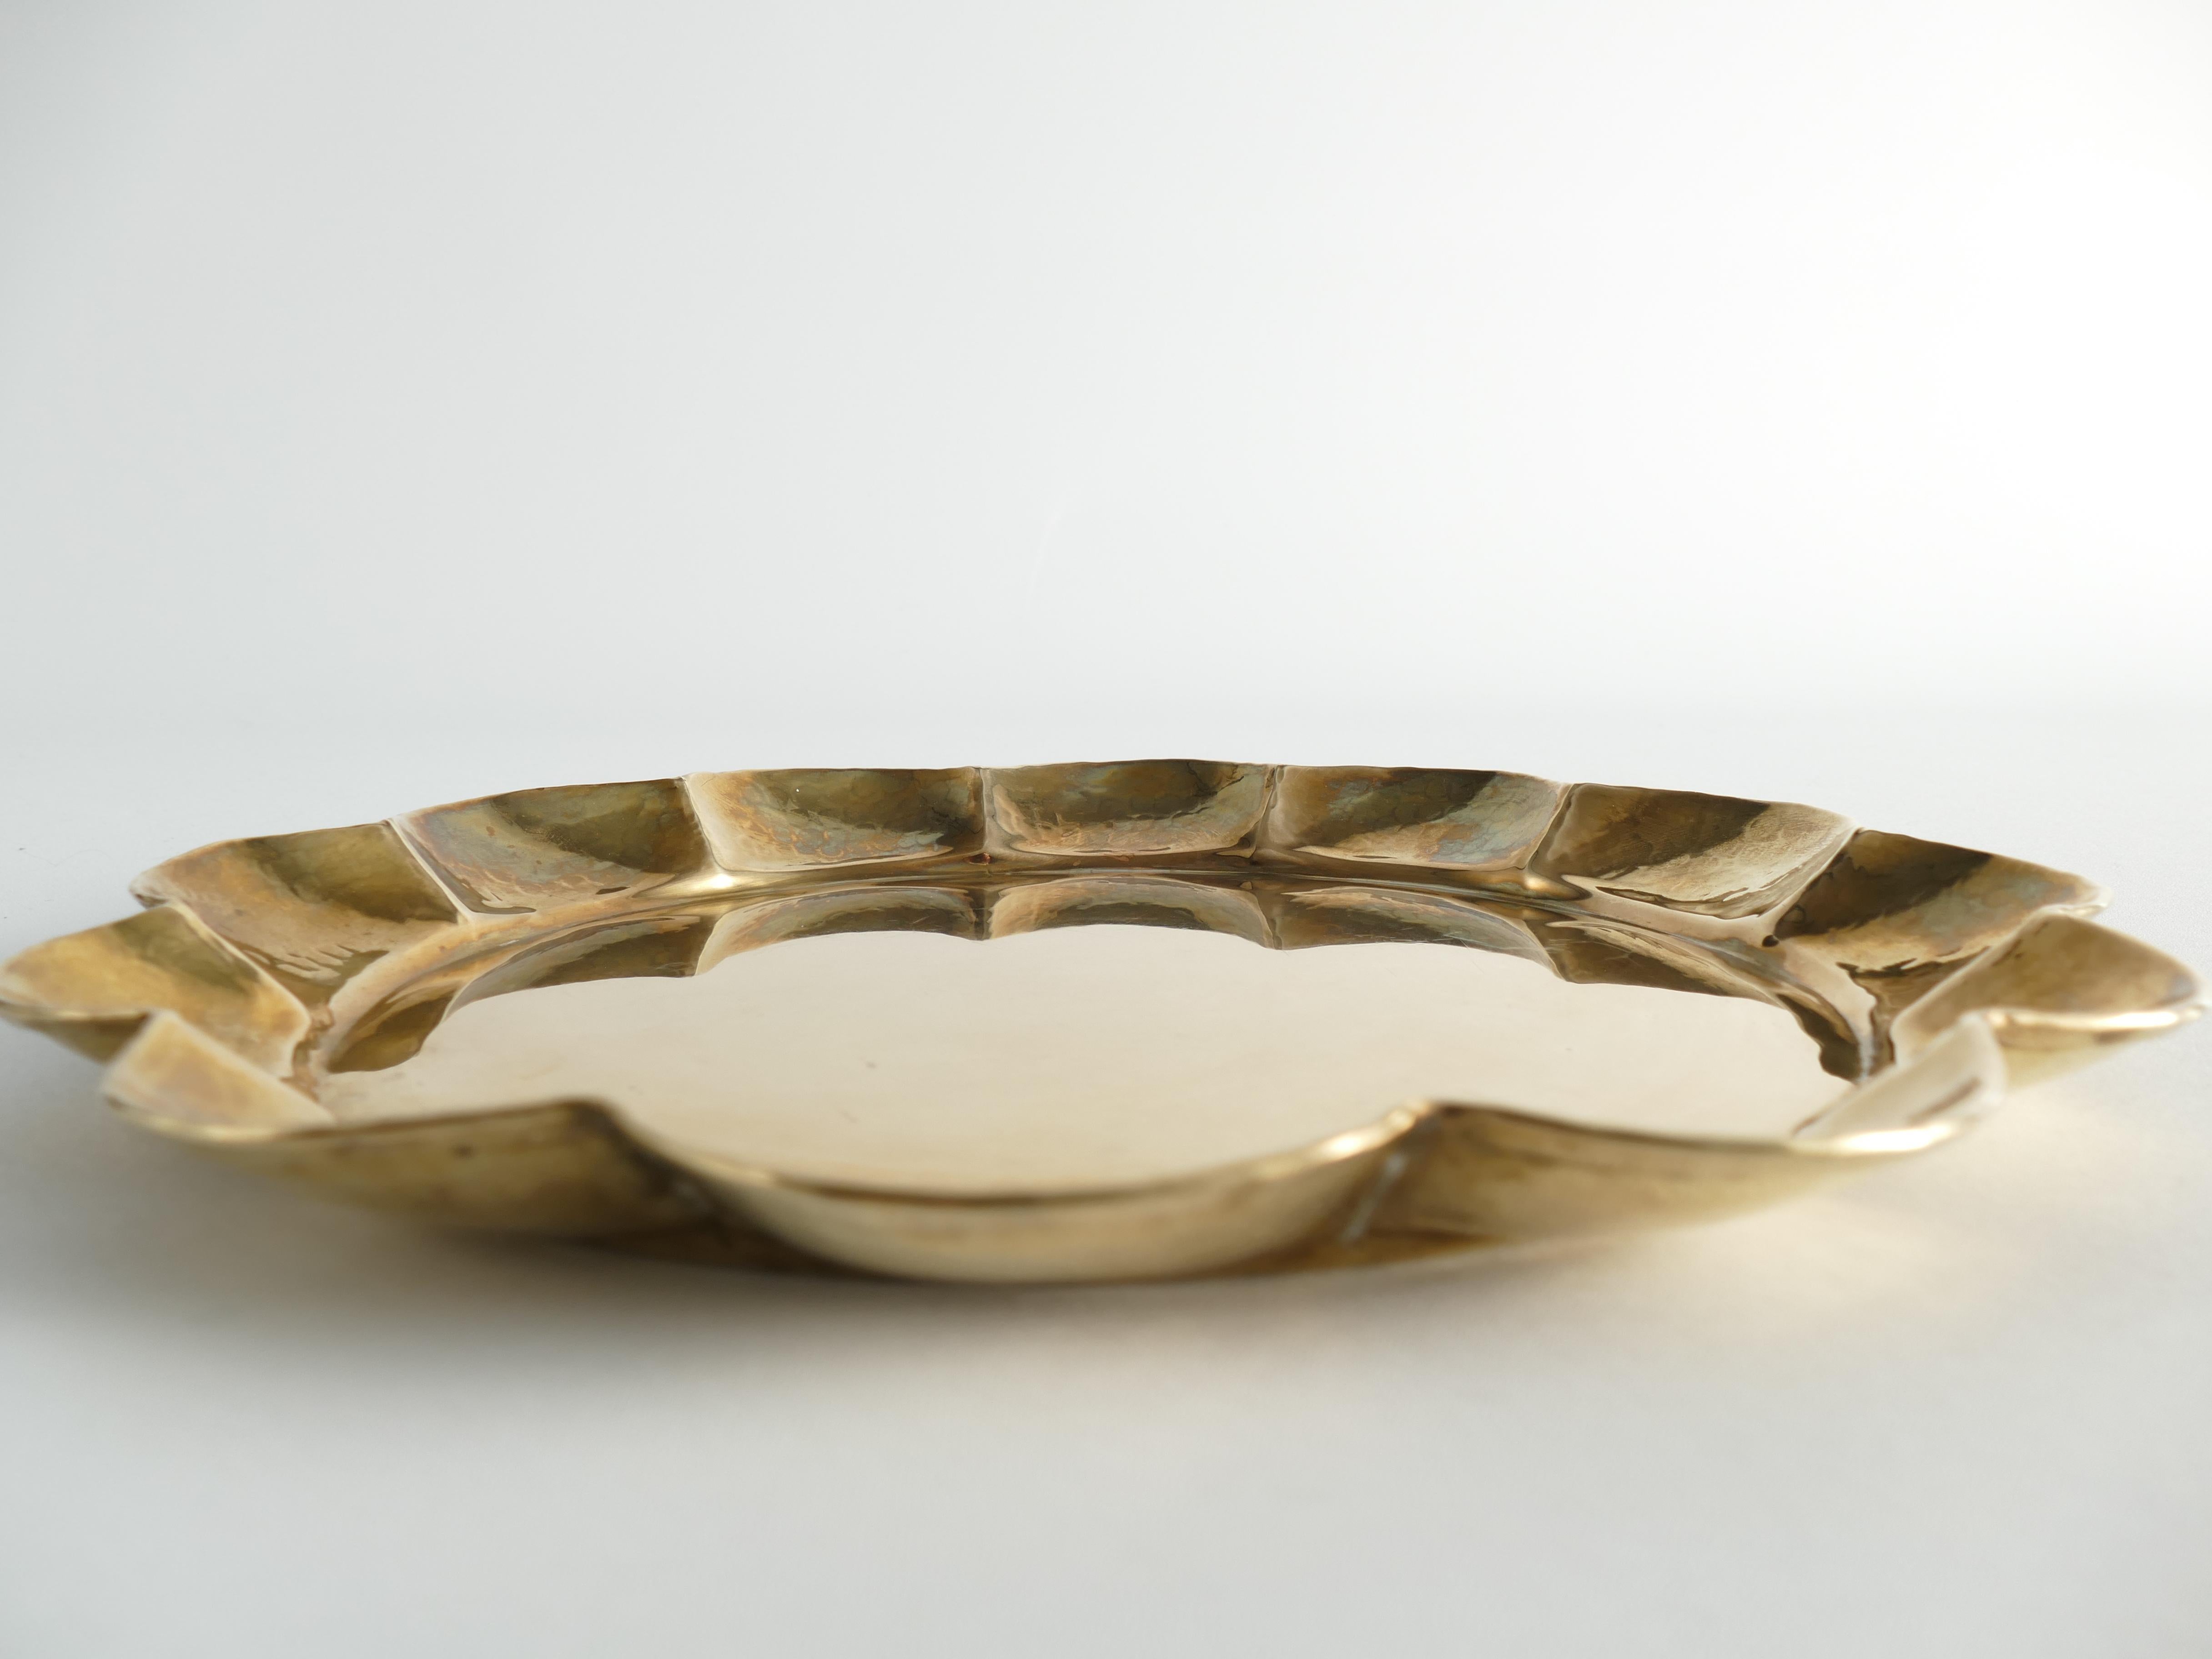 Hollywood Regency Round Brass Tray by Arvid Johansson, Arvika Konstsmide, Sweden For Sale 5